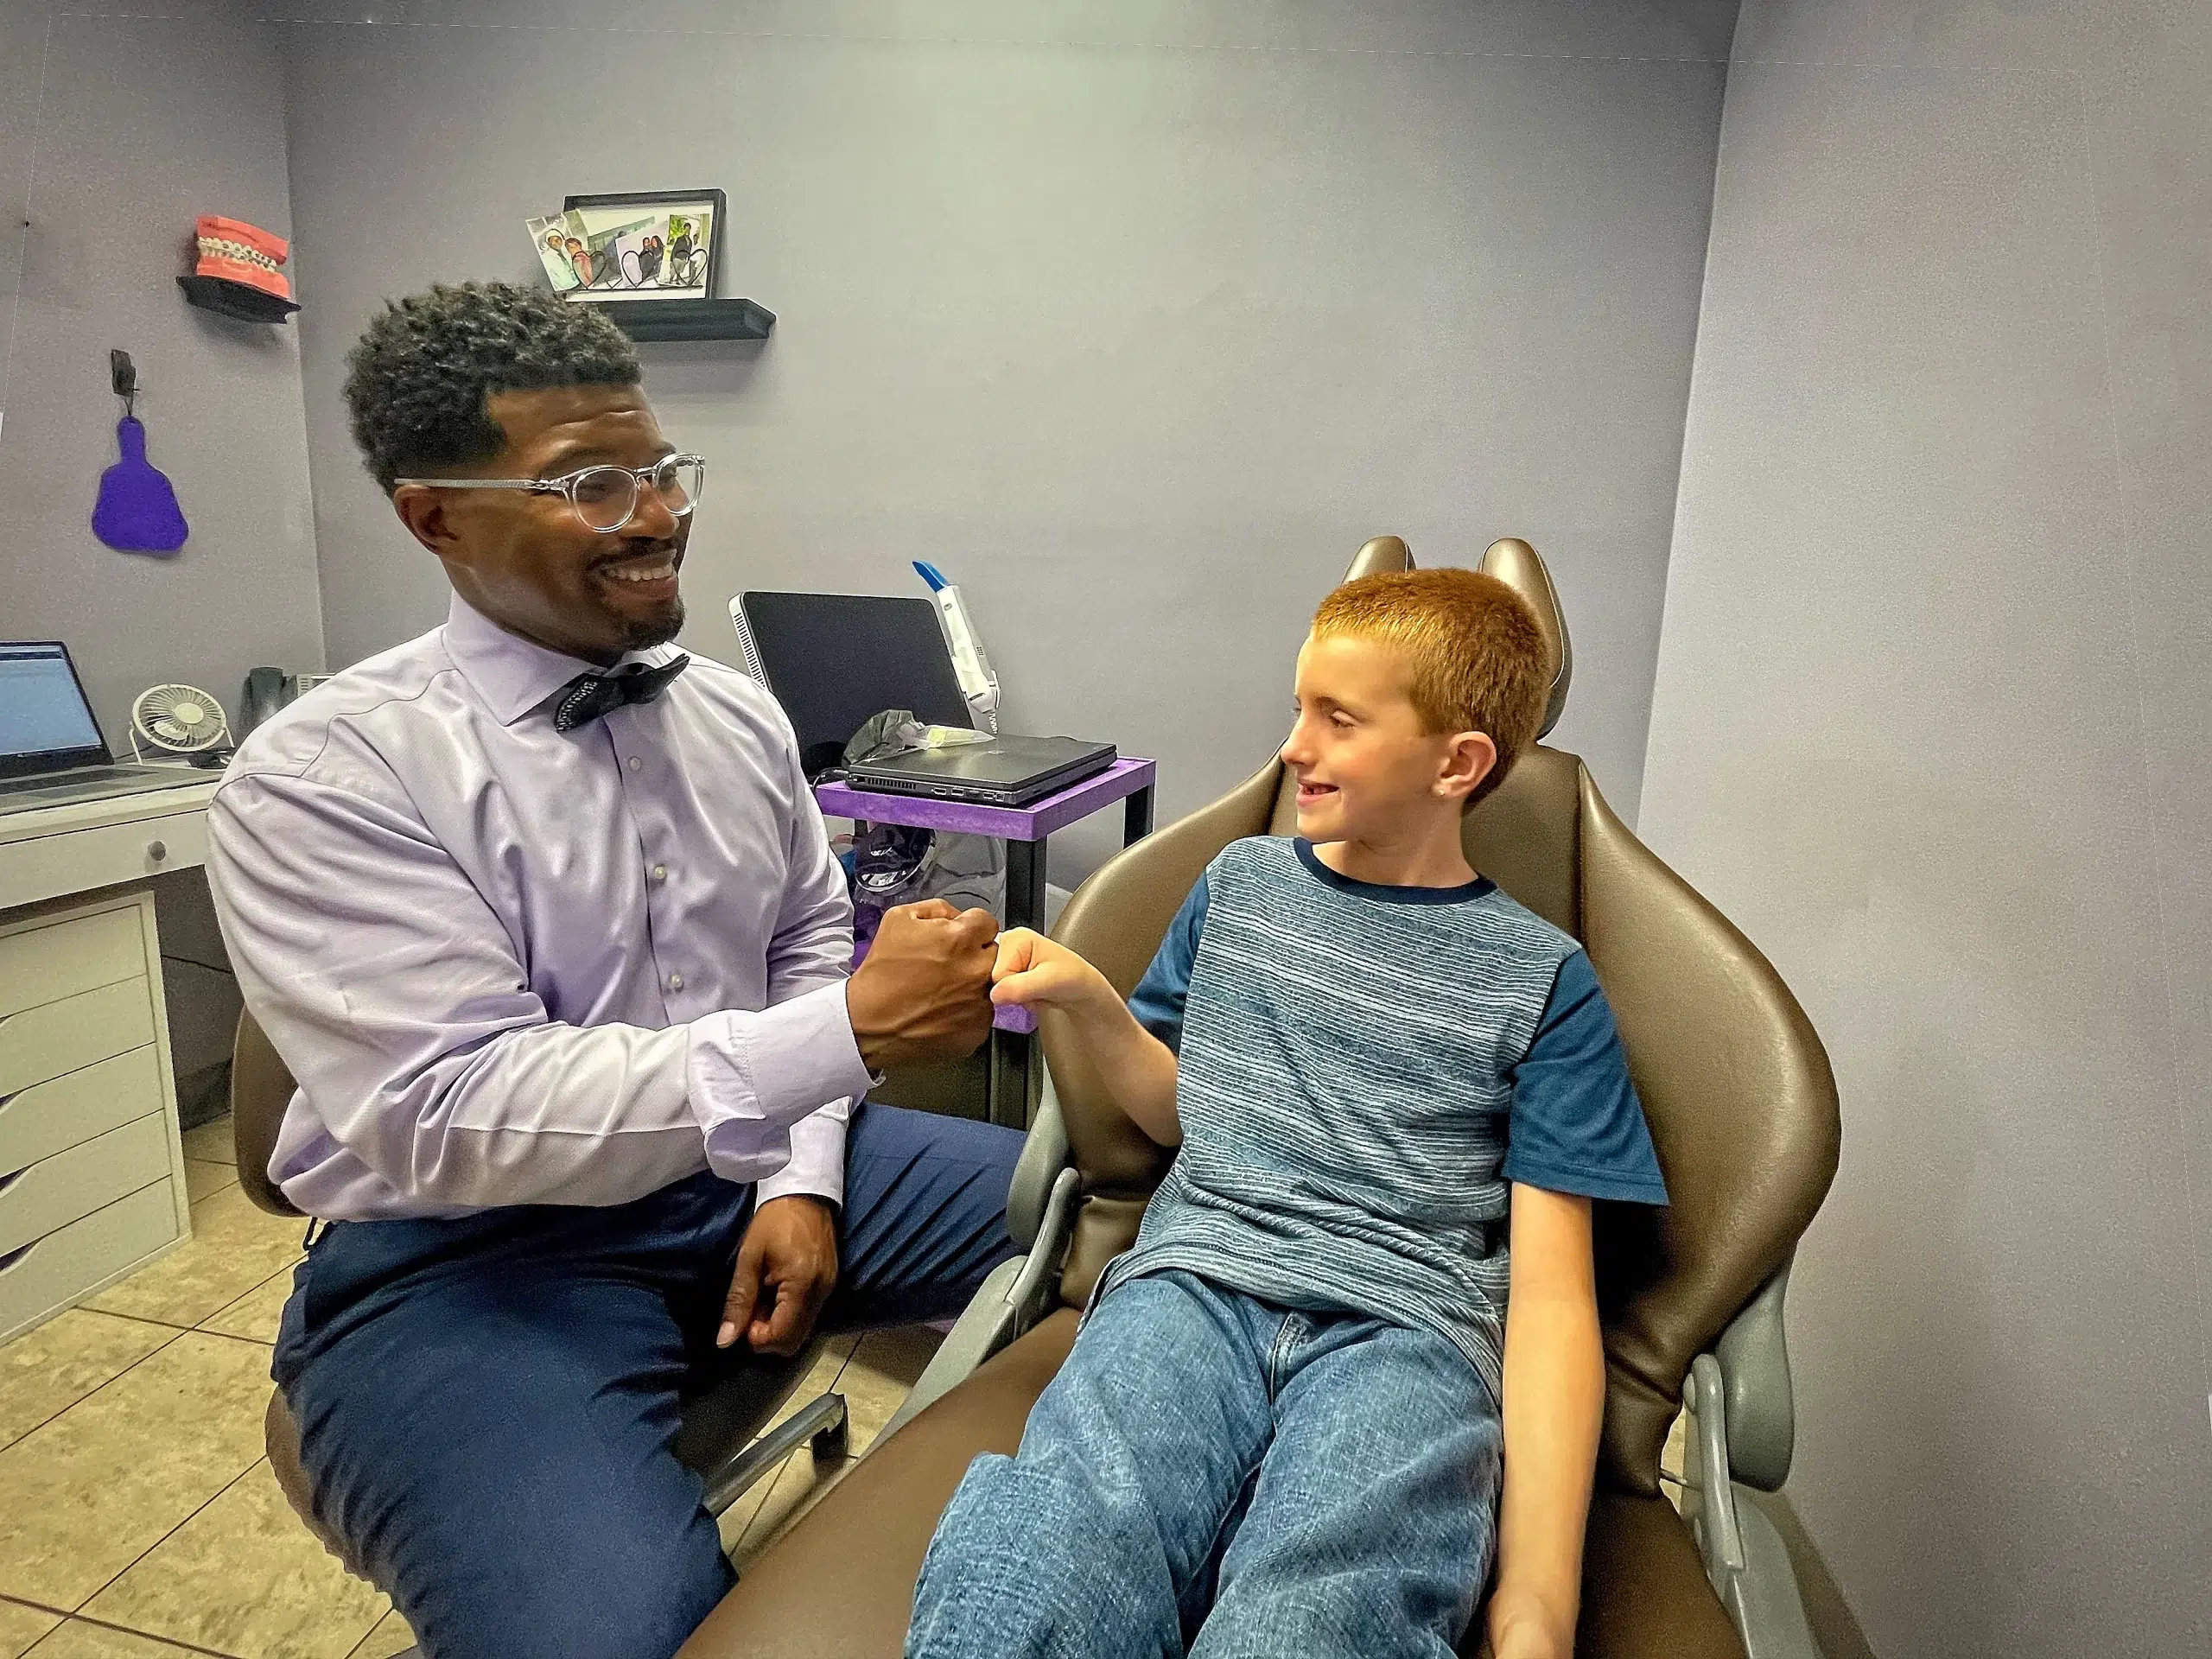 Dr. Romia Goff in a lavender shirt with a bowtie giving a young patient a fist bump